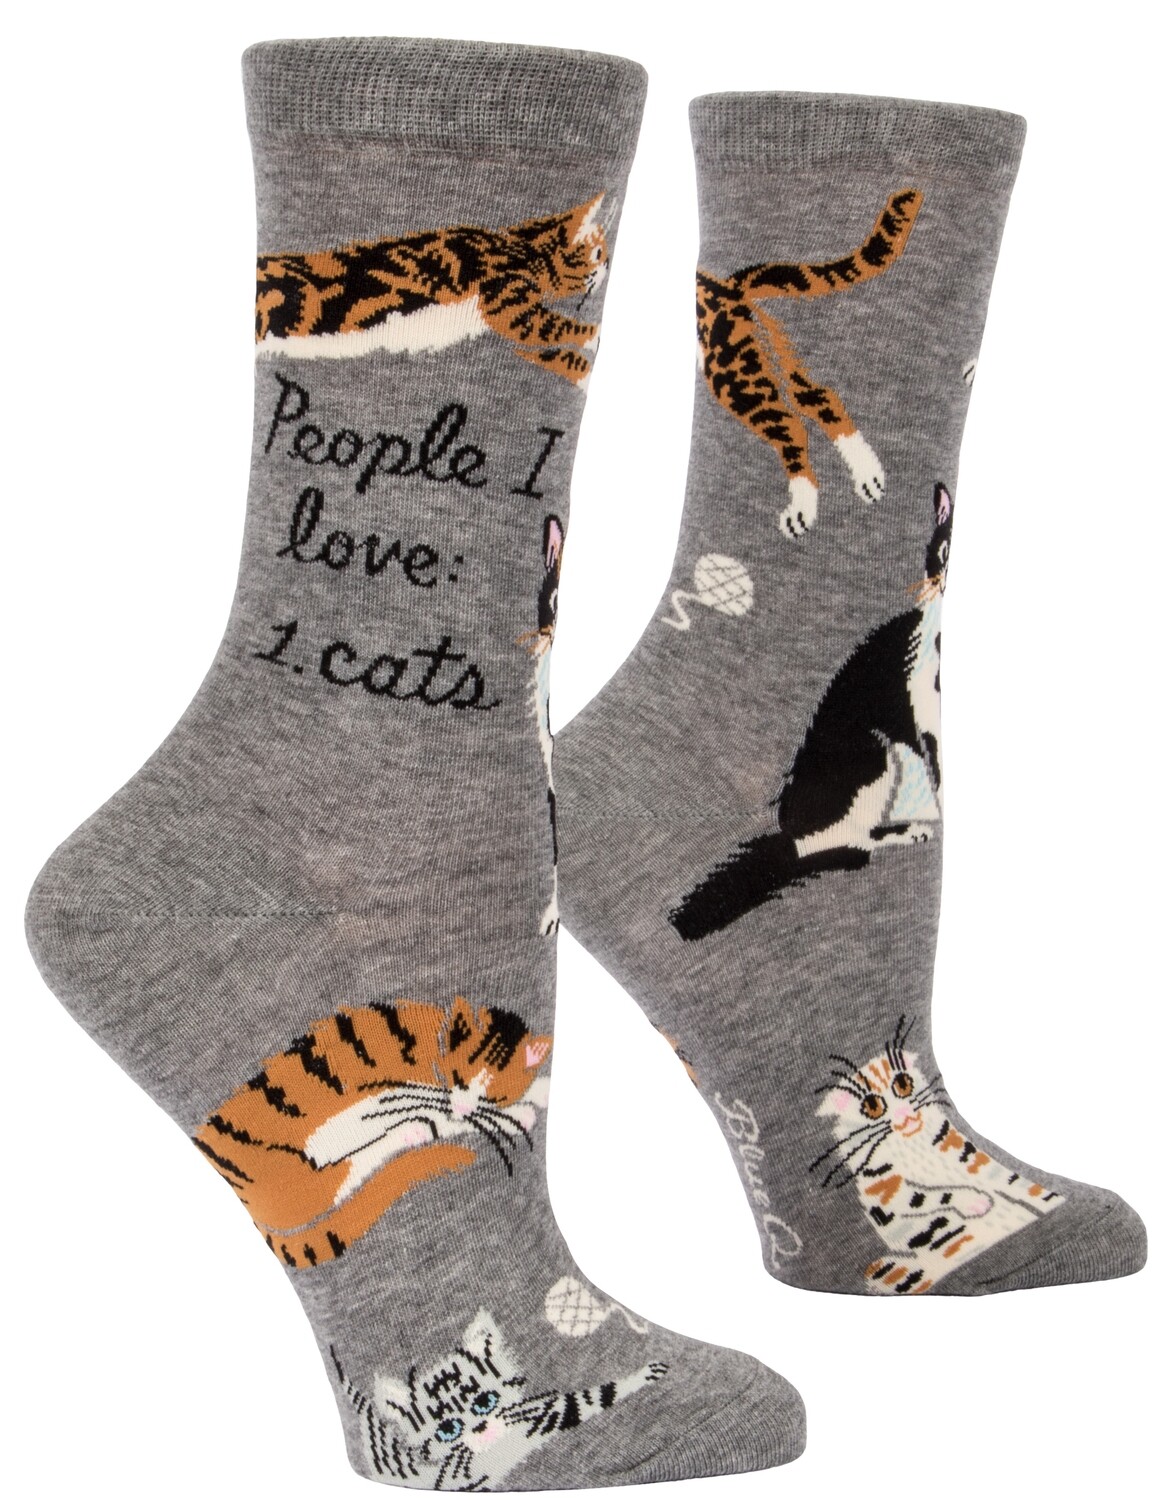 Chaussettes femmes People I Love: Cats